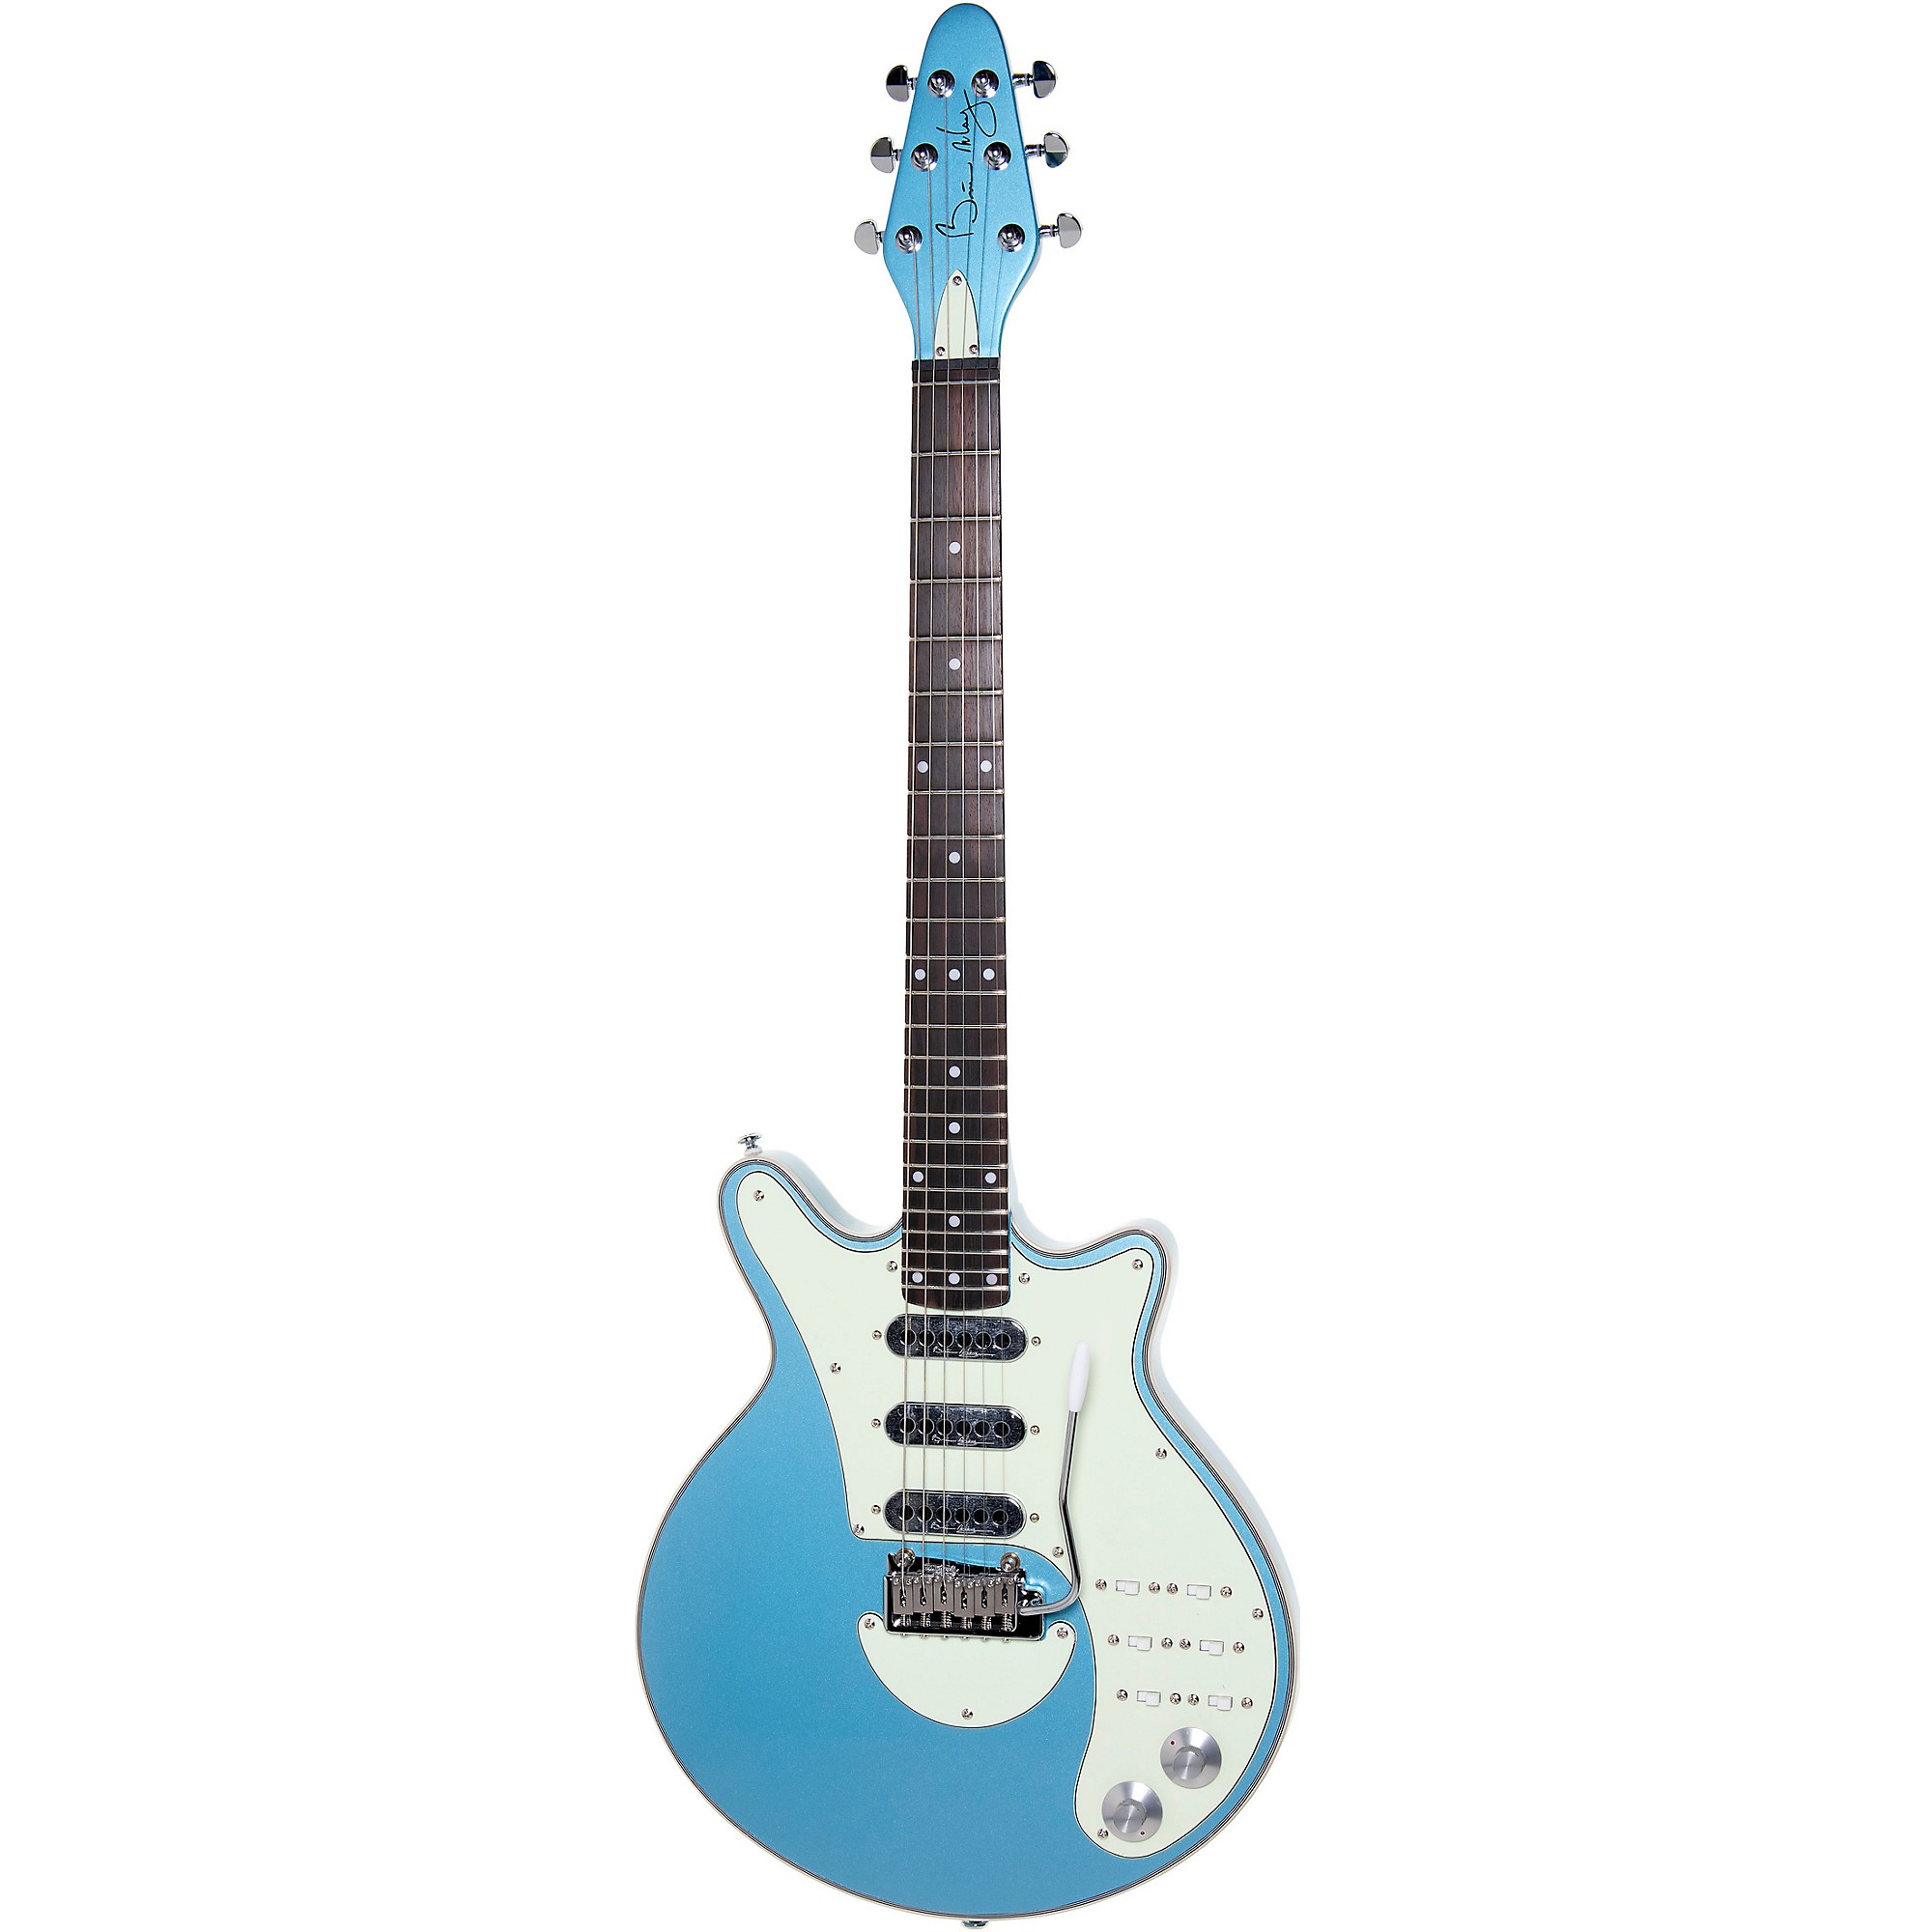 may brian friends виниловая пластинка may brian friends star fleet project Brian May Guitars BMG Special Limited Edition Электрогитара Windermere Blue